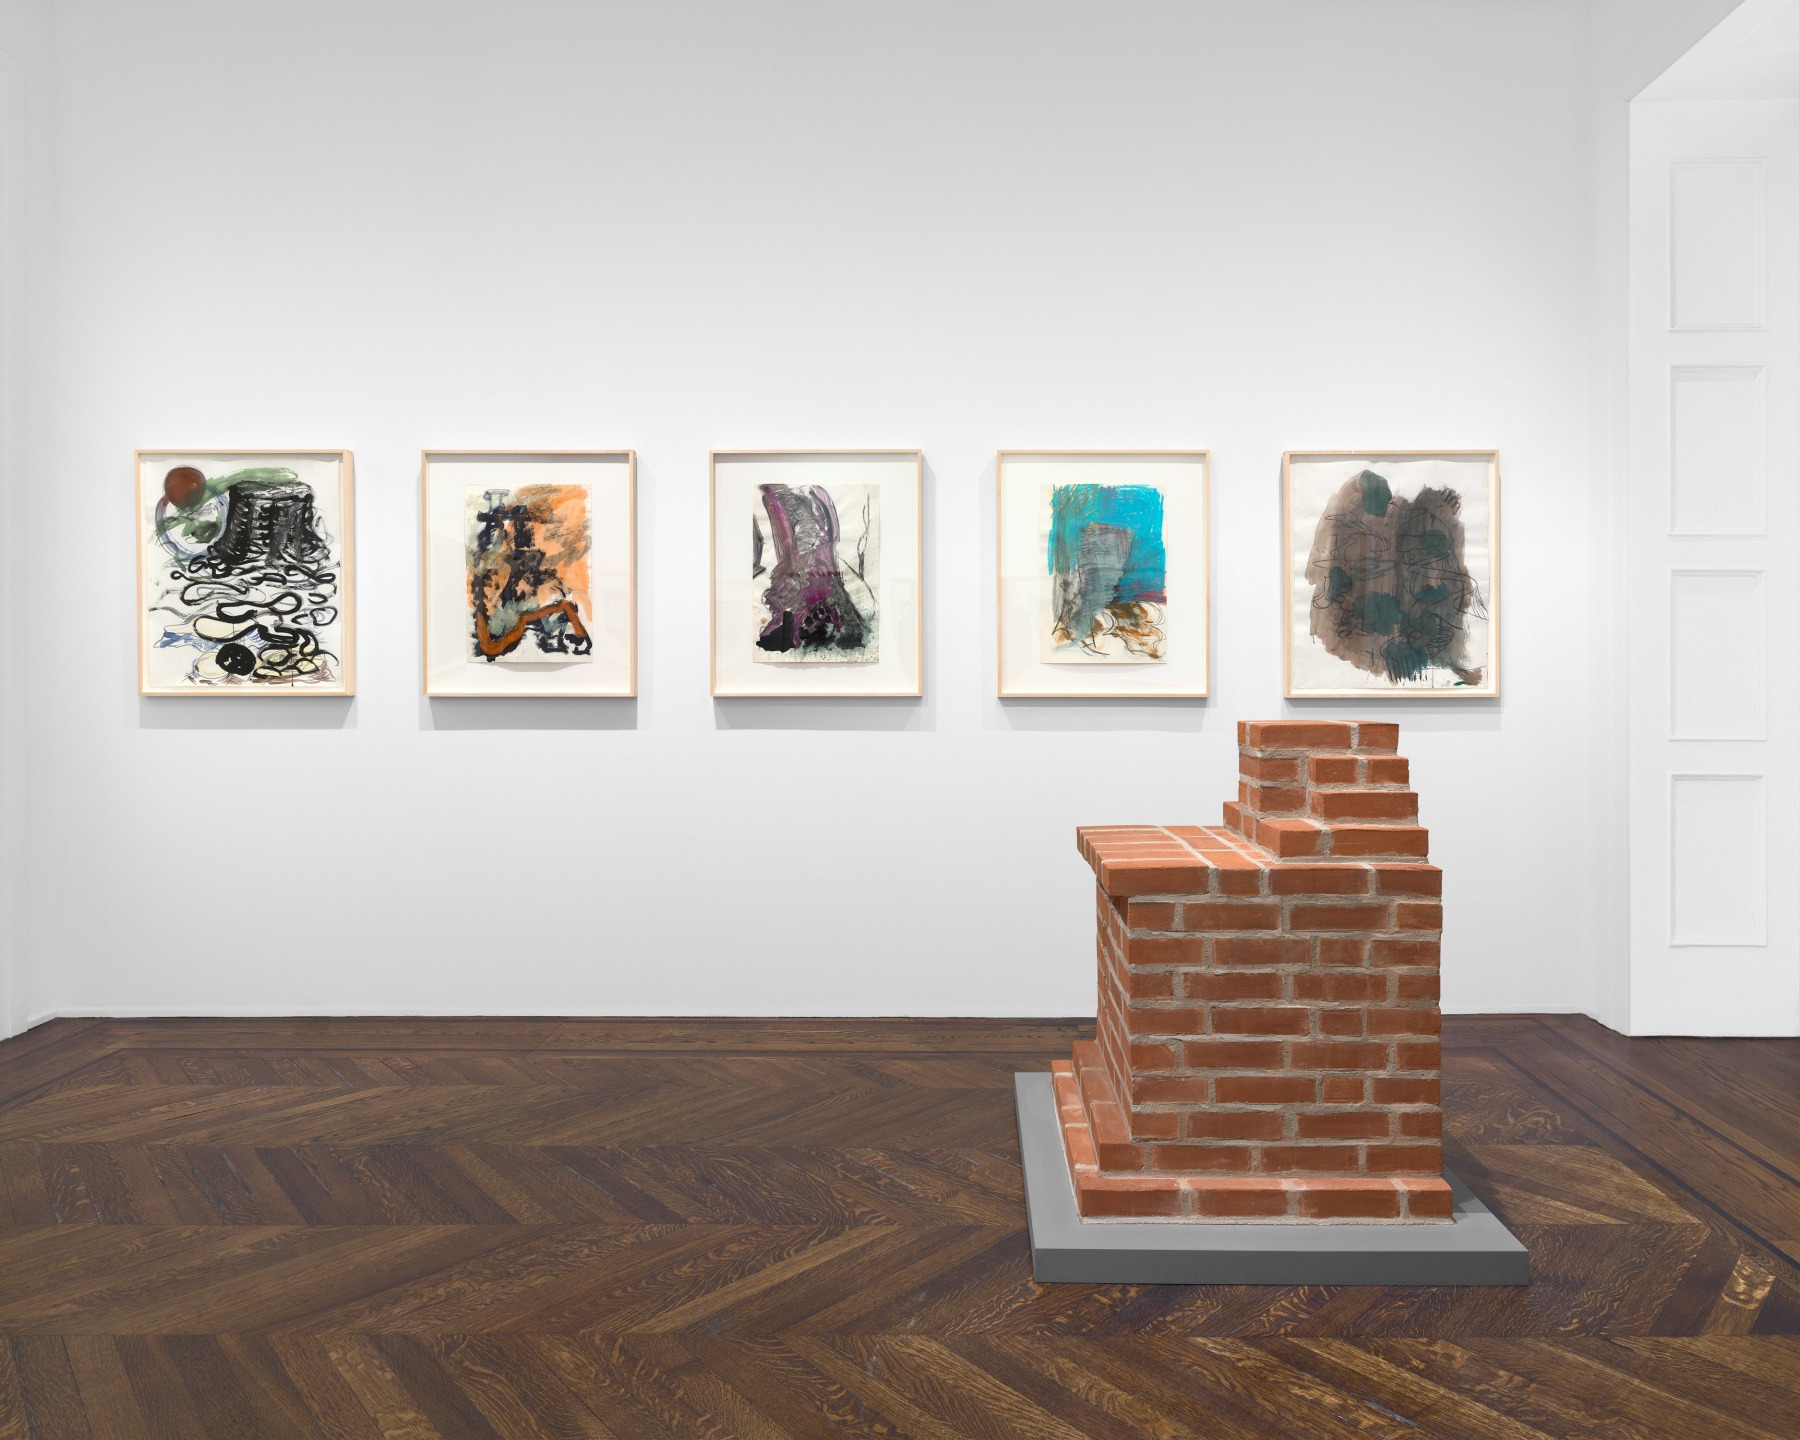 PER KIRKEBY Works on Paper, Works in Brick 20 November 2019 through 25 January 2020 UPPER EAST SIDE, NEW YORK, Installation View 16